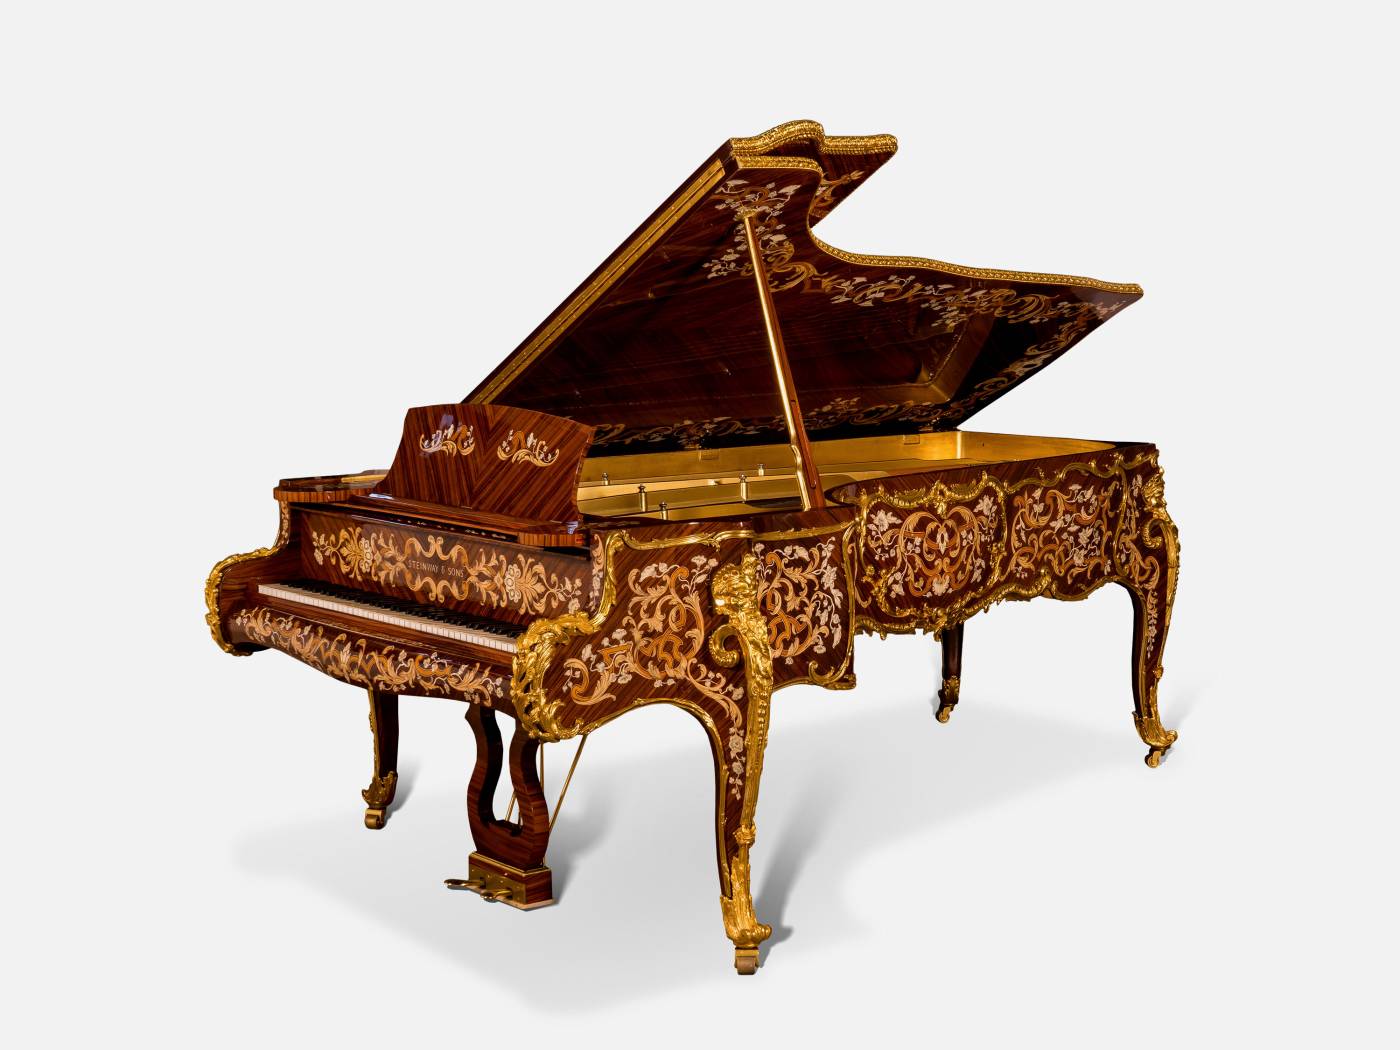 ART. 2705 – The elegance of luxury classic Pianos made in Italy by C.G. Capelletti.